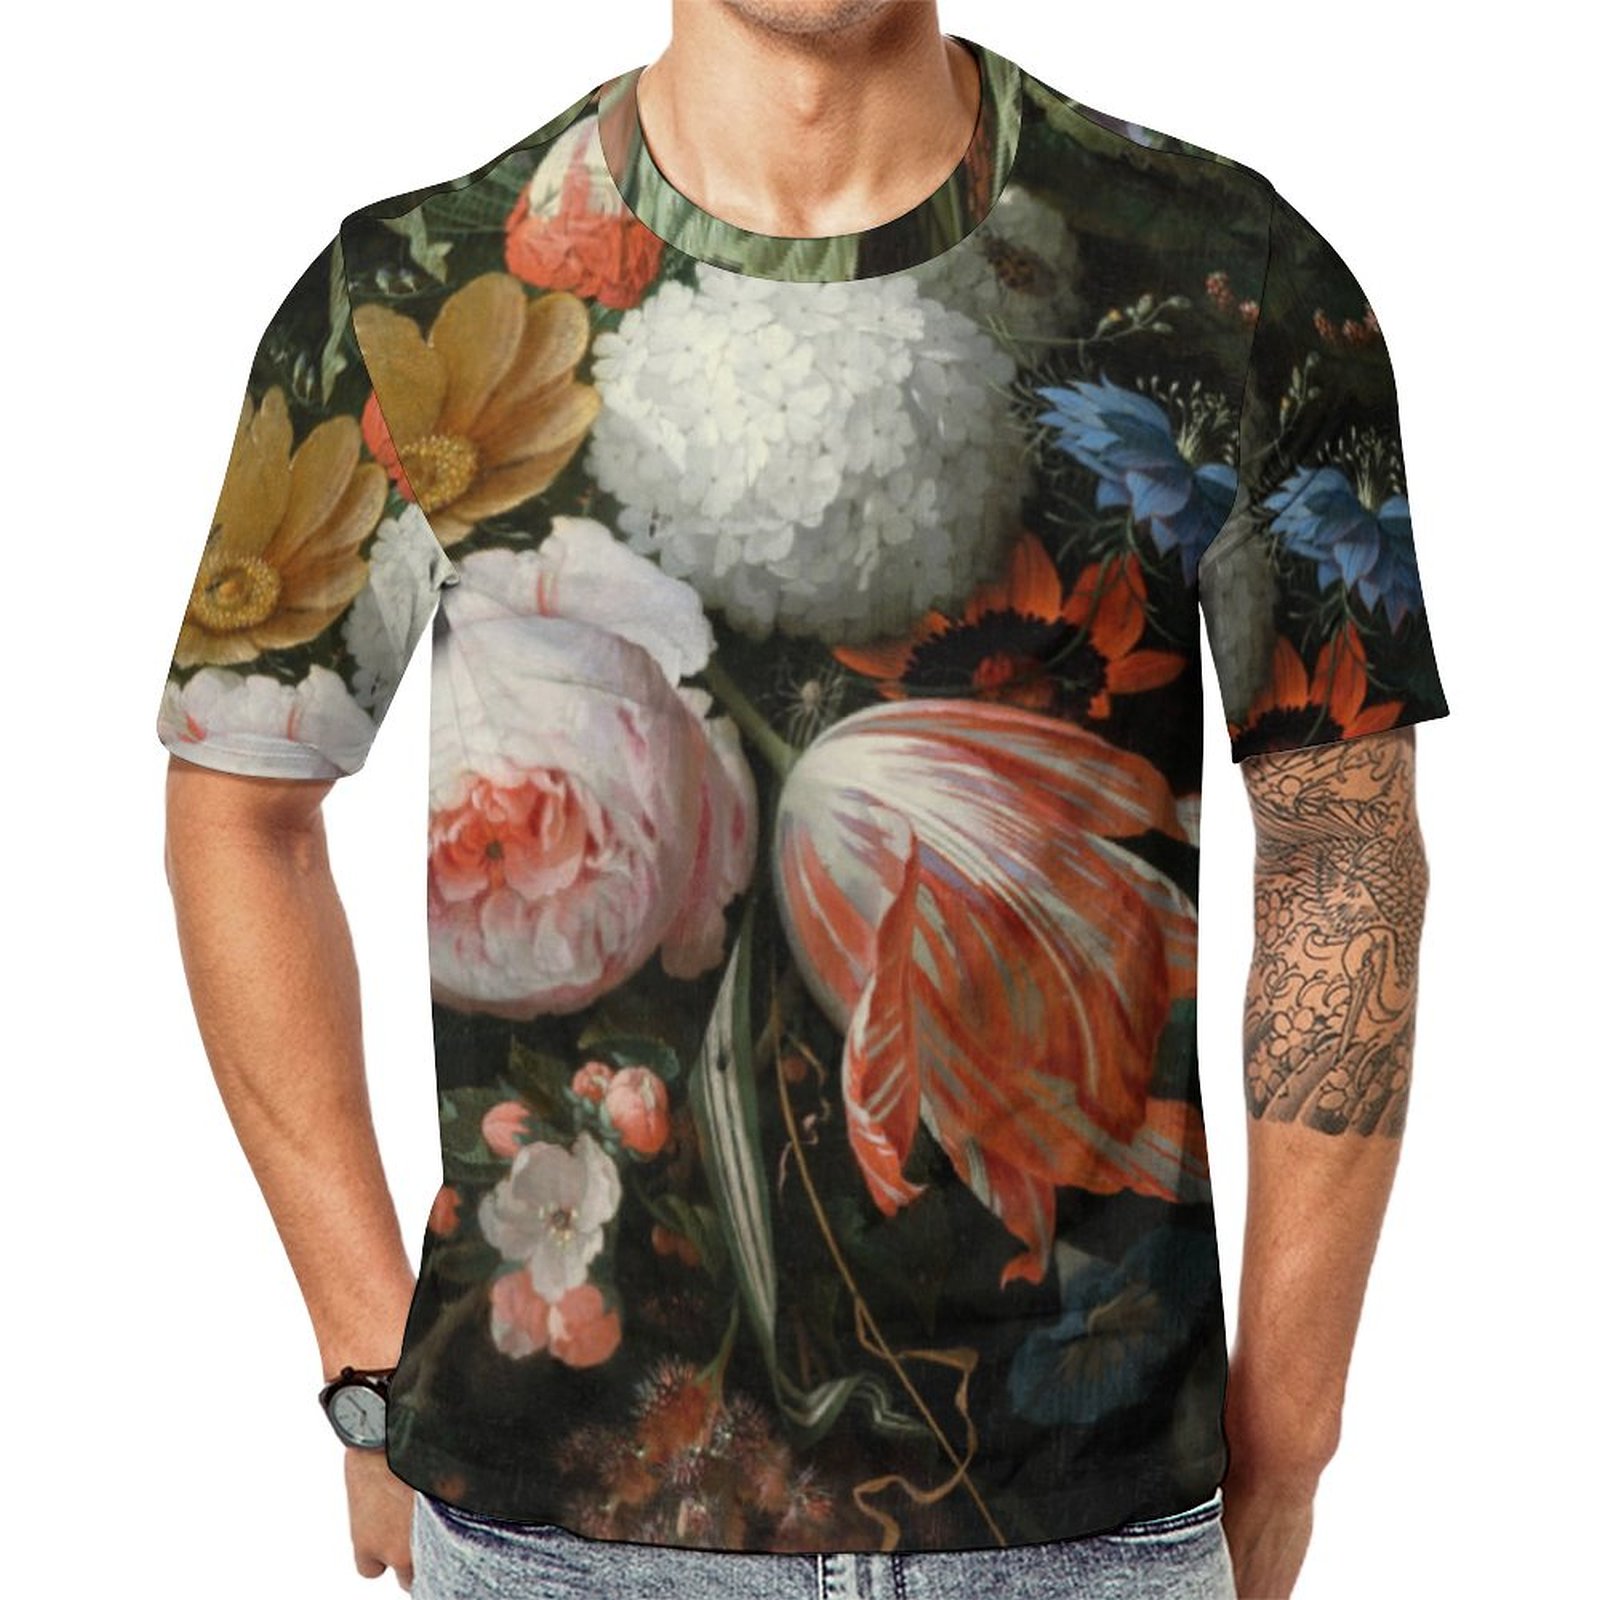 Abraham Mignon A Hanging Bouquet Of Flowers Short Sleeve Print Unisex Tshirt Summer Casual Tees for Men and Women Coolcoshirts